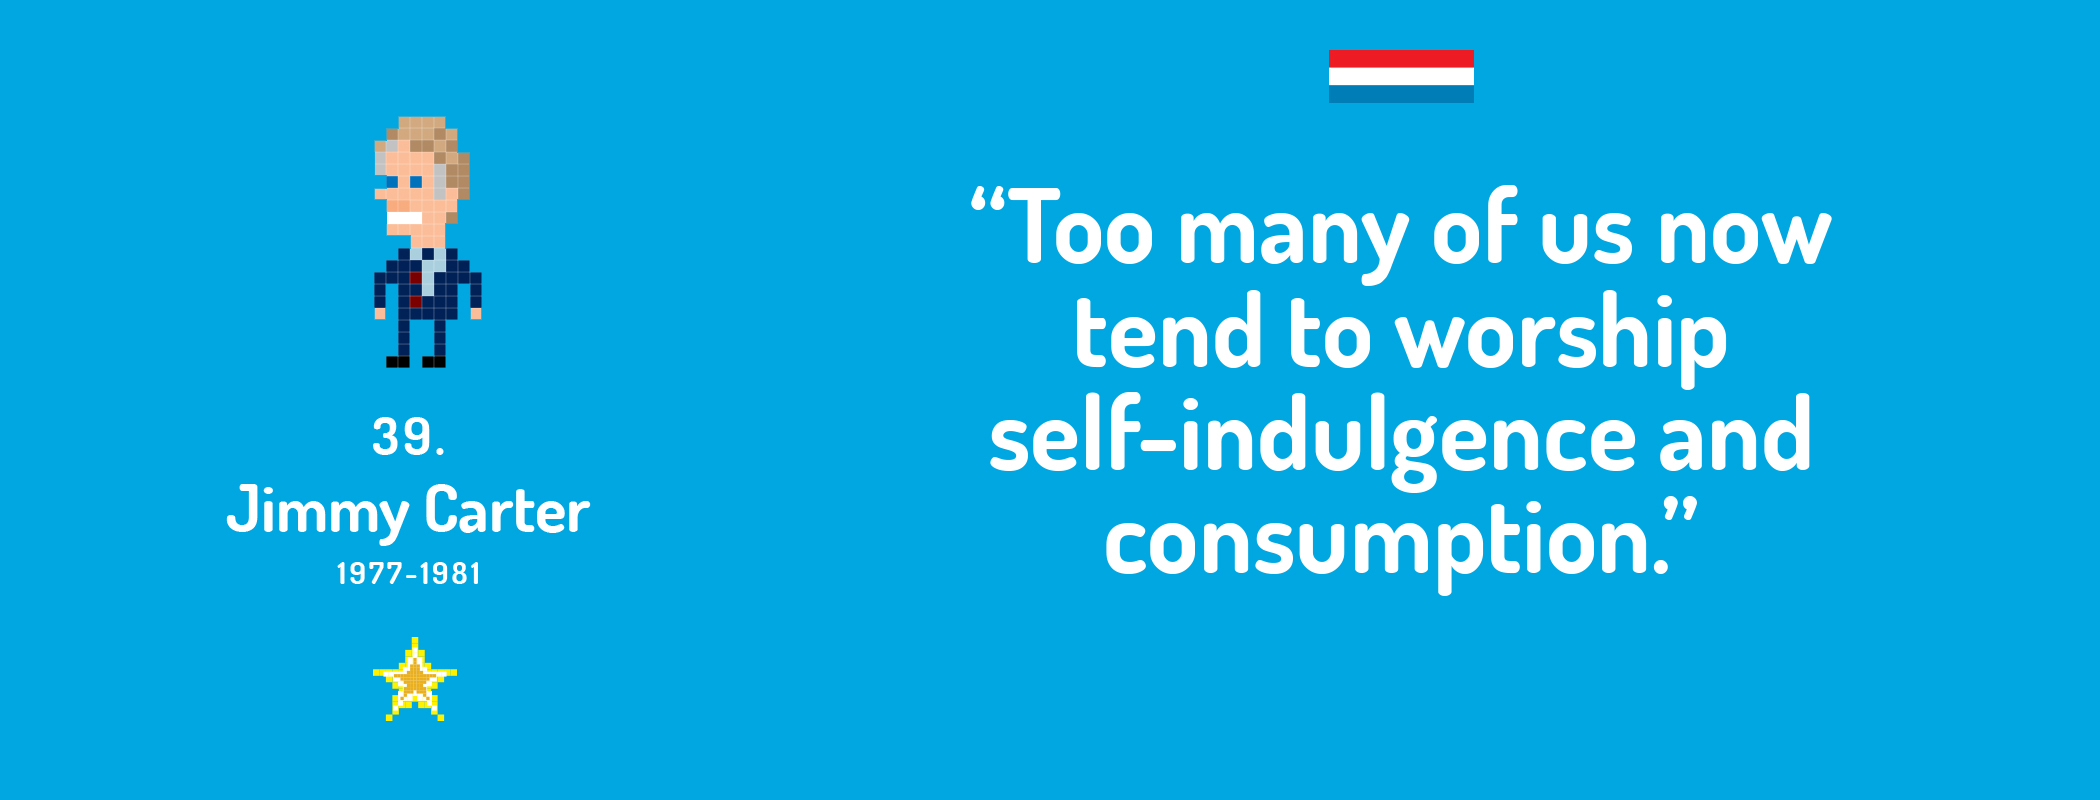 Too many of us now tend to worship self-indulgence and consumption.